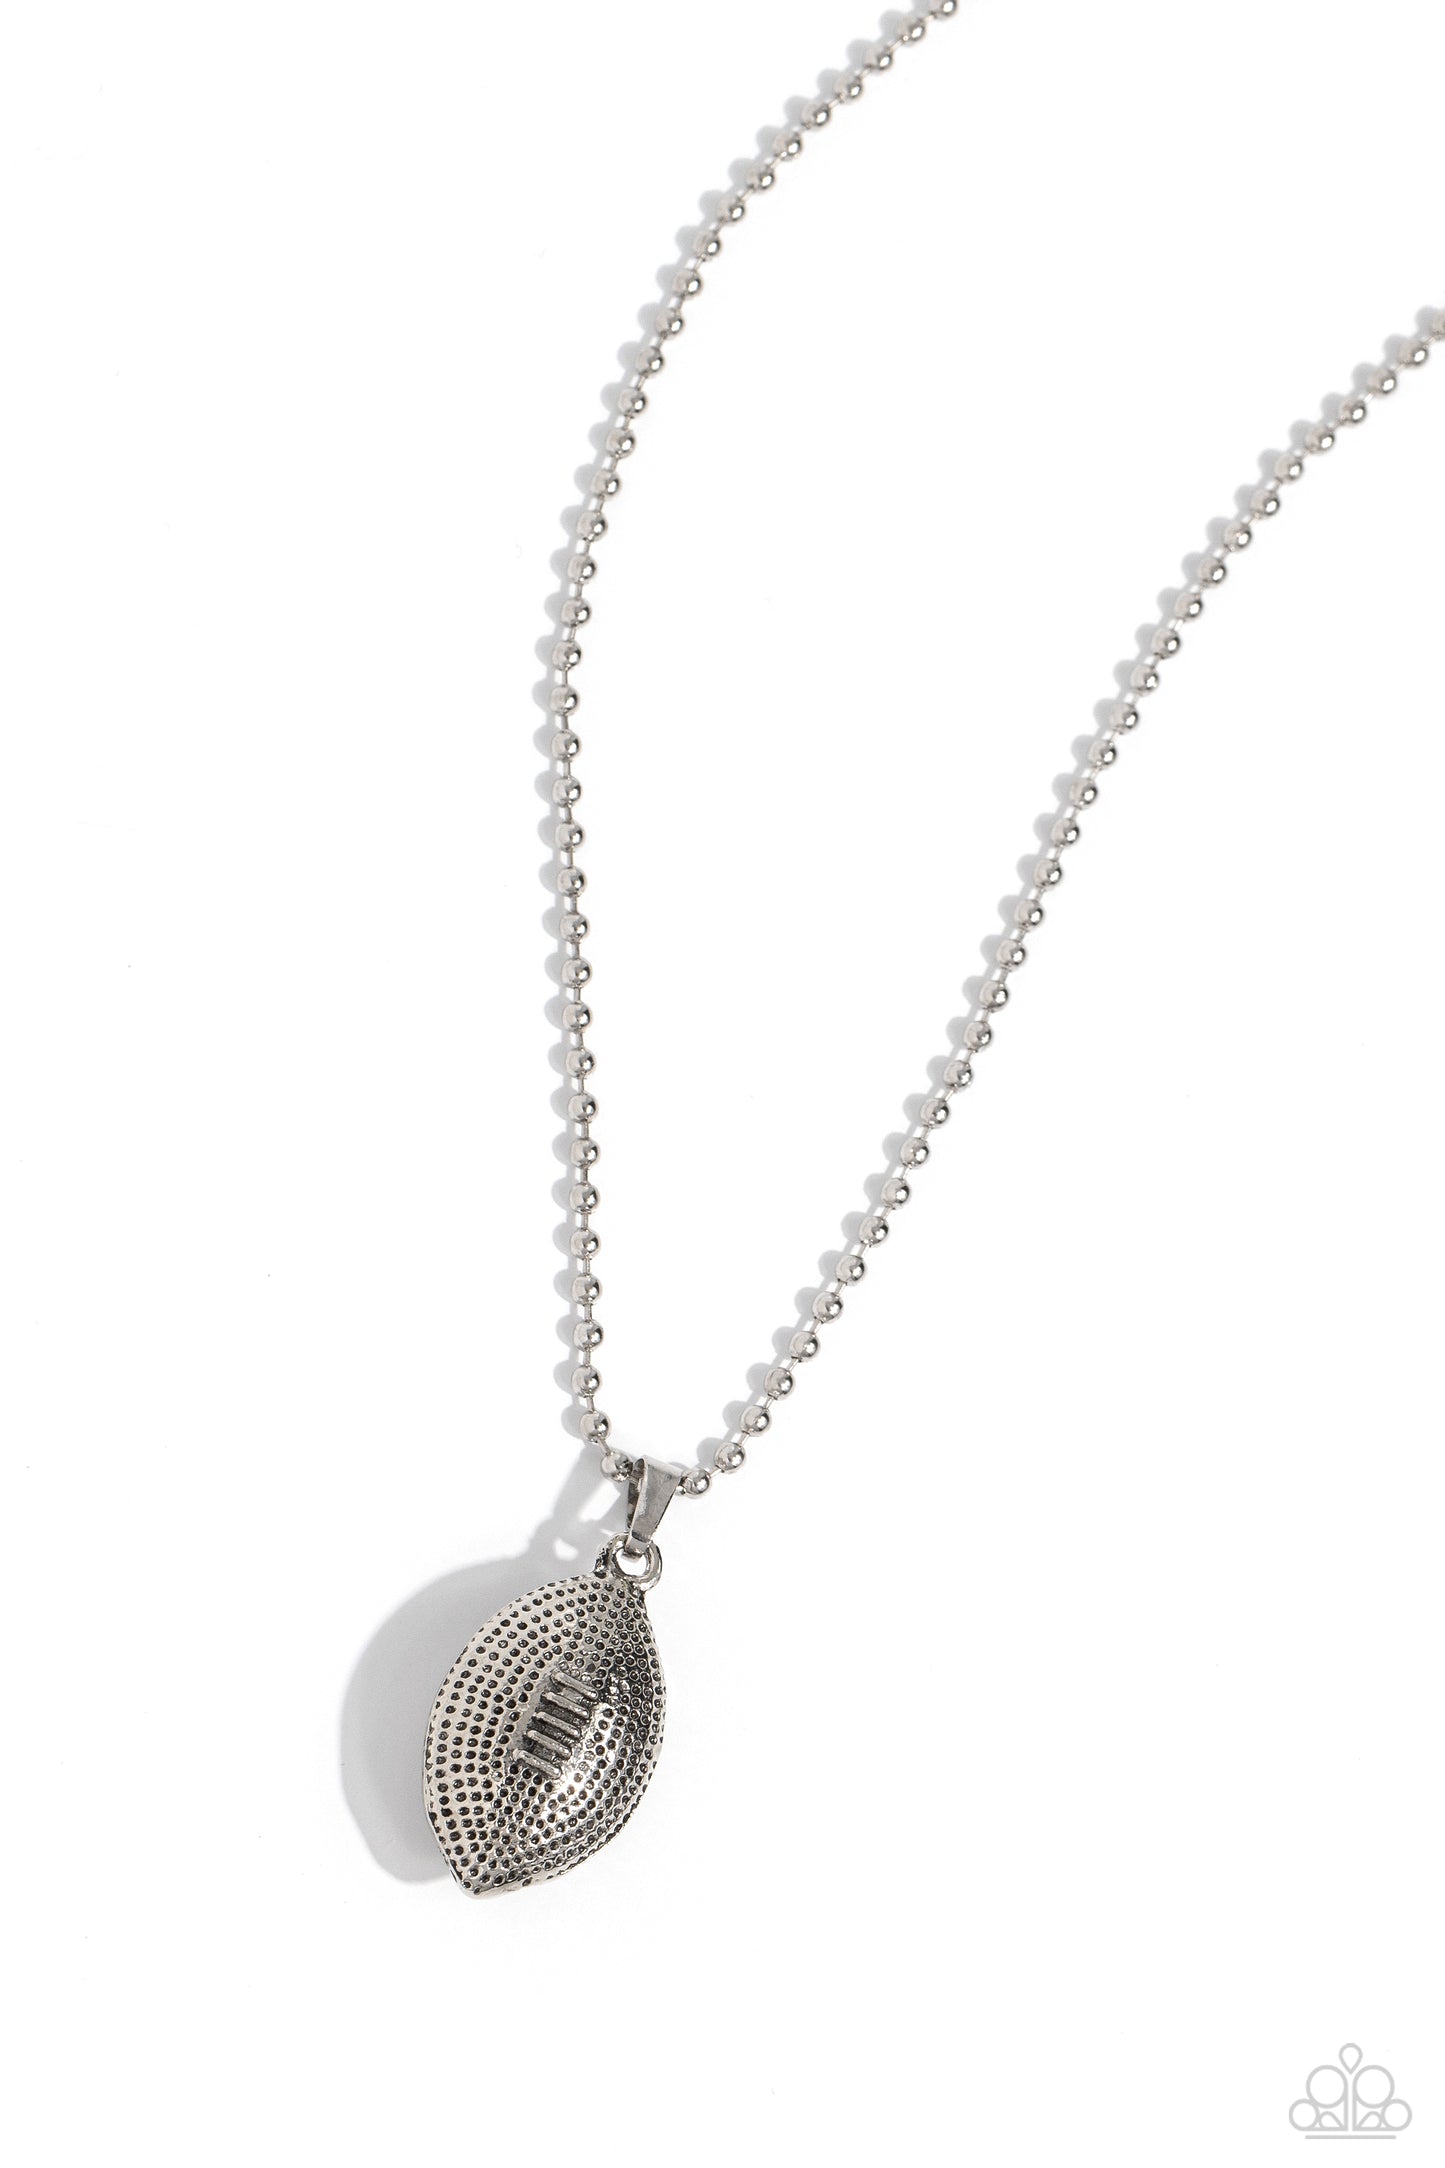 Timeless Tackle Silver Football Necklace - Paparazzi Accessories  Featuring a dot motif, a thick silver football pendant glides along a silver ball chain for a touchdown tribute. Features an adjustable clasp closure.  Sold as one individual necklace. Includes one pair of matching earrings.  P2DA-SVXX-406XX